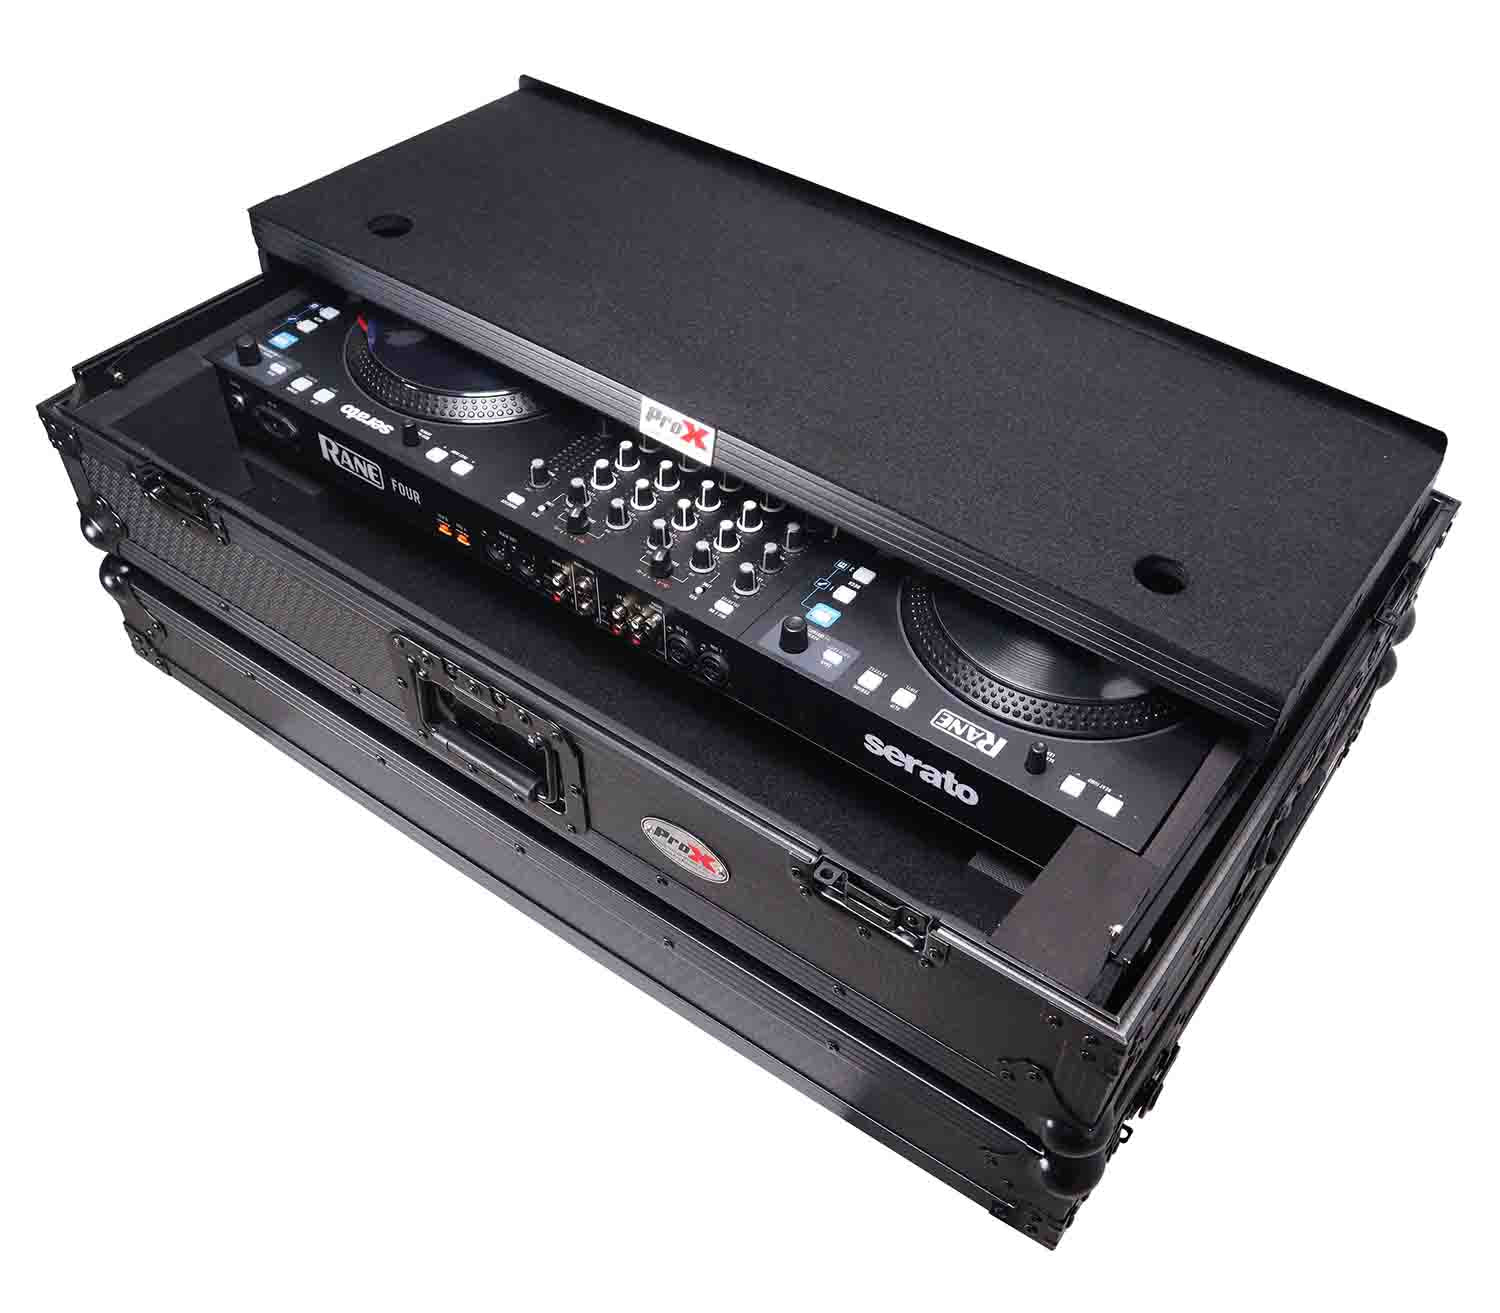 ProX XS-RANEFOUR WLTBL LED ATA Flight Style Road Case for RANE Four DJ Controller with 1U Rack Space and Wheels - Black Finish - Hollywood DJ